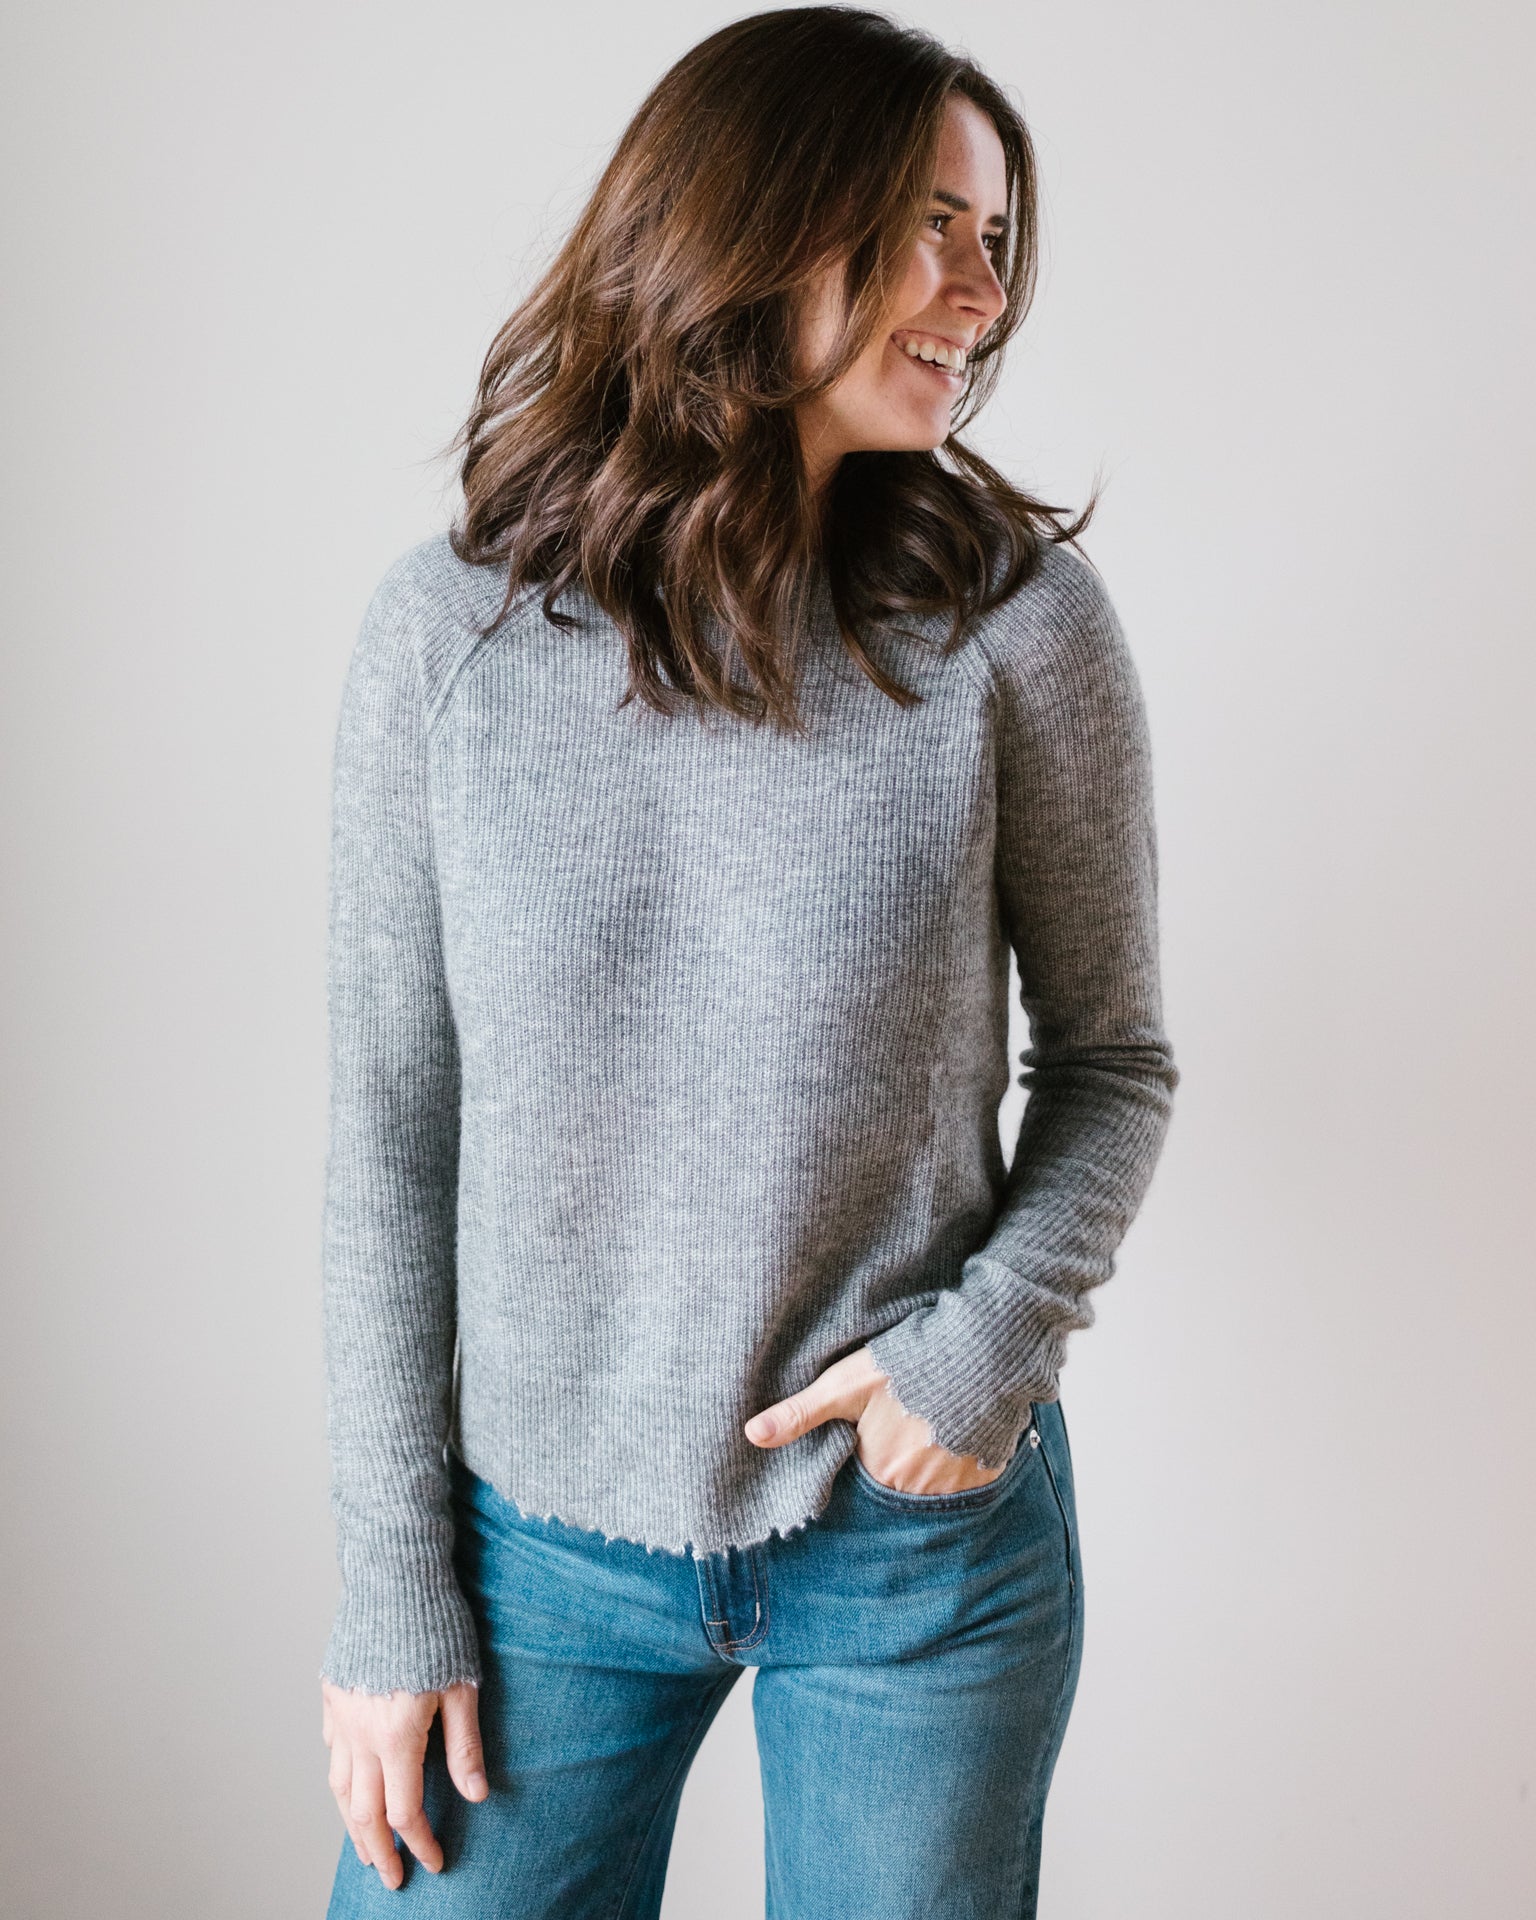 Autumn Cashmere Raw Edge Shaker Crew in Banker's Gray- Bliss Boutiques